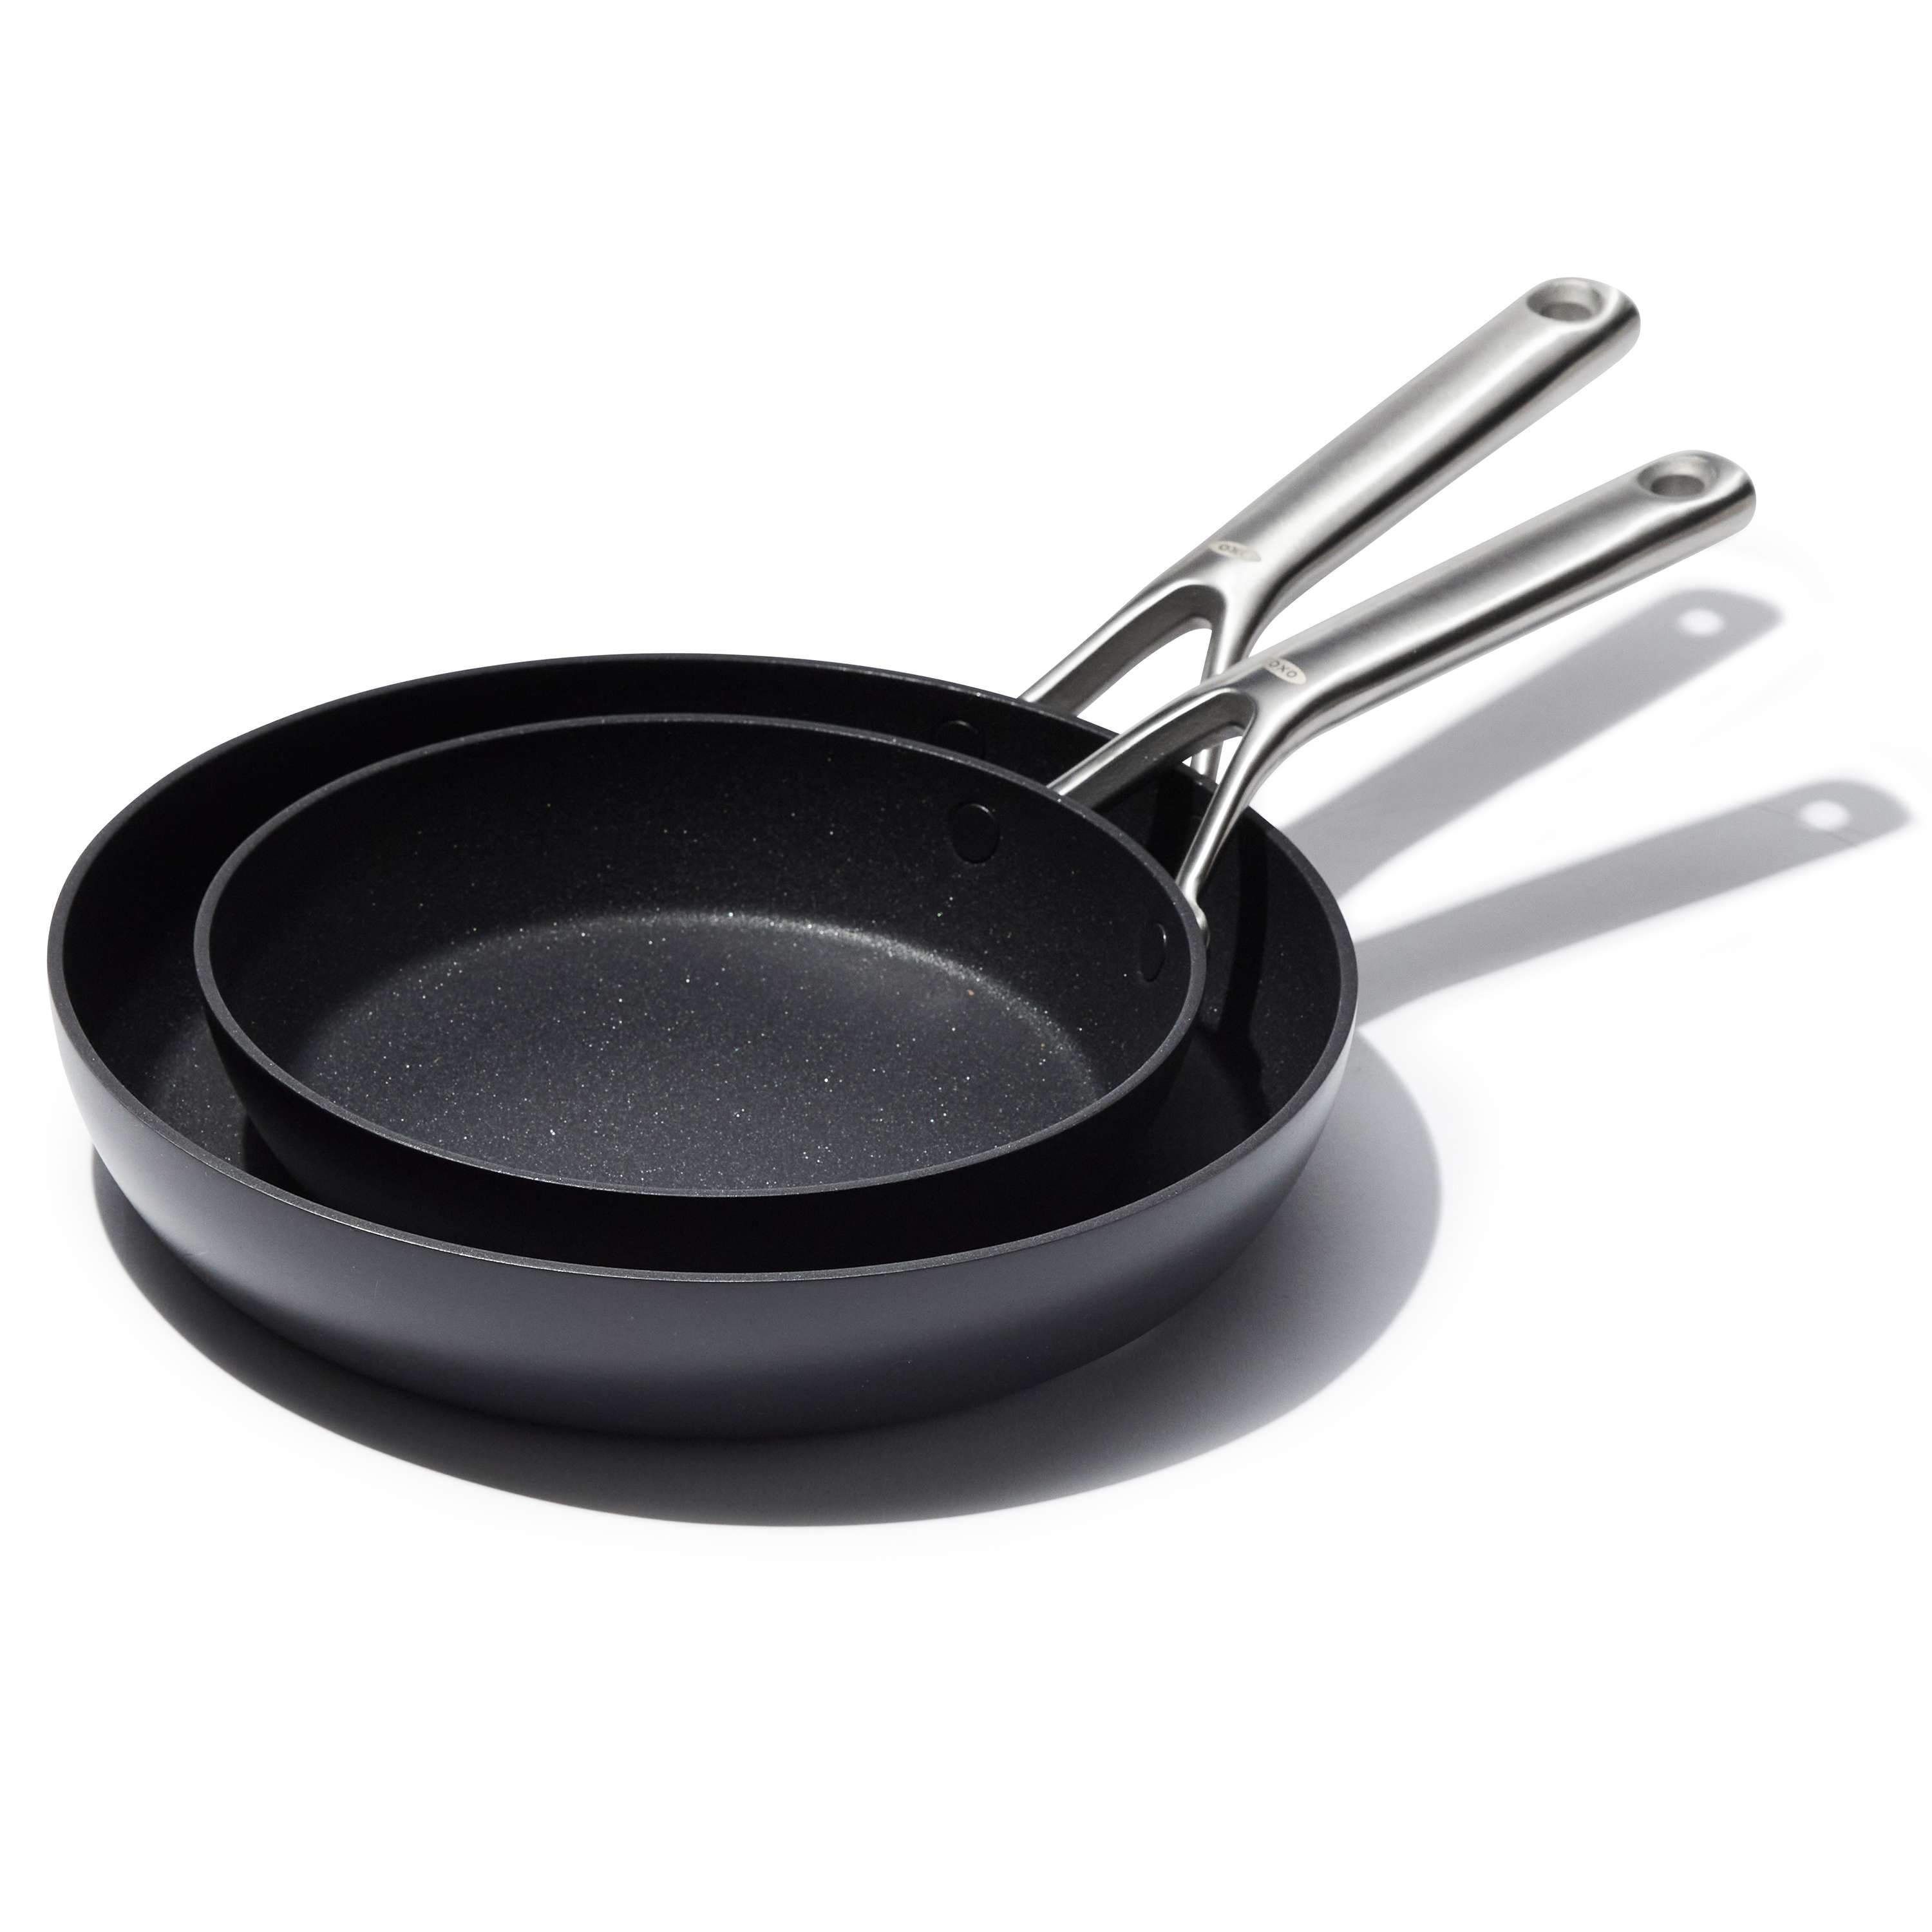 https://ak1.ostkcdn.com/images/products/is/images/direct/2195b67cf874bf27d1cb7a57e8b18ec4c3263beb/OXO-Professional-Ceramic-Non-Stick-2-Piece-Frying-Pan-Set%2C-8-In-and-10-In.jpg